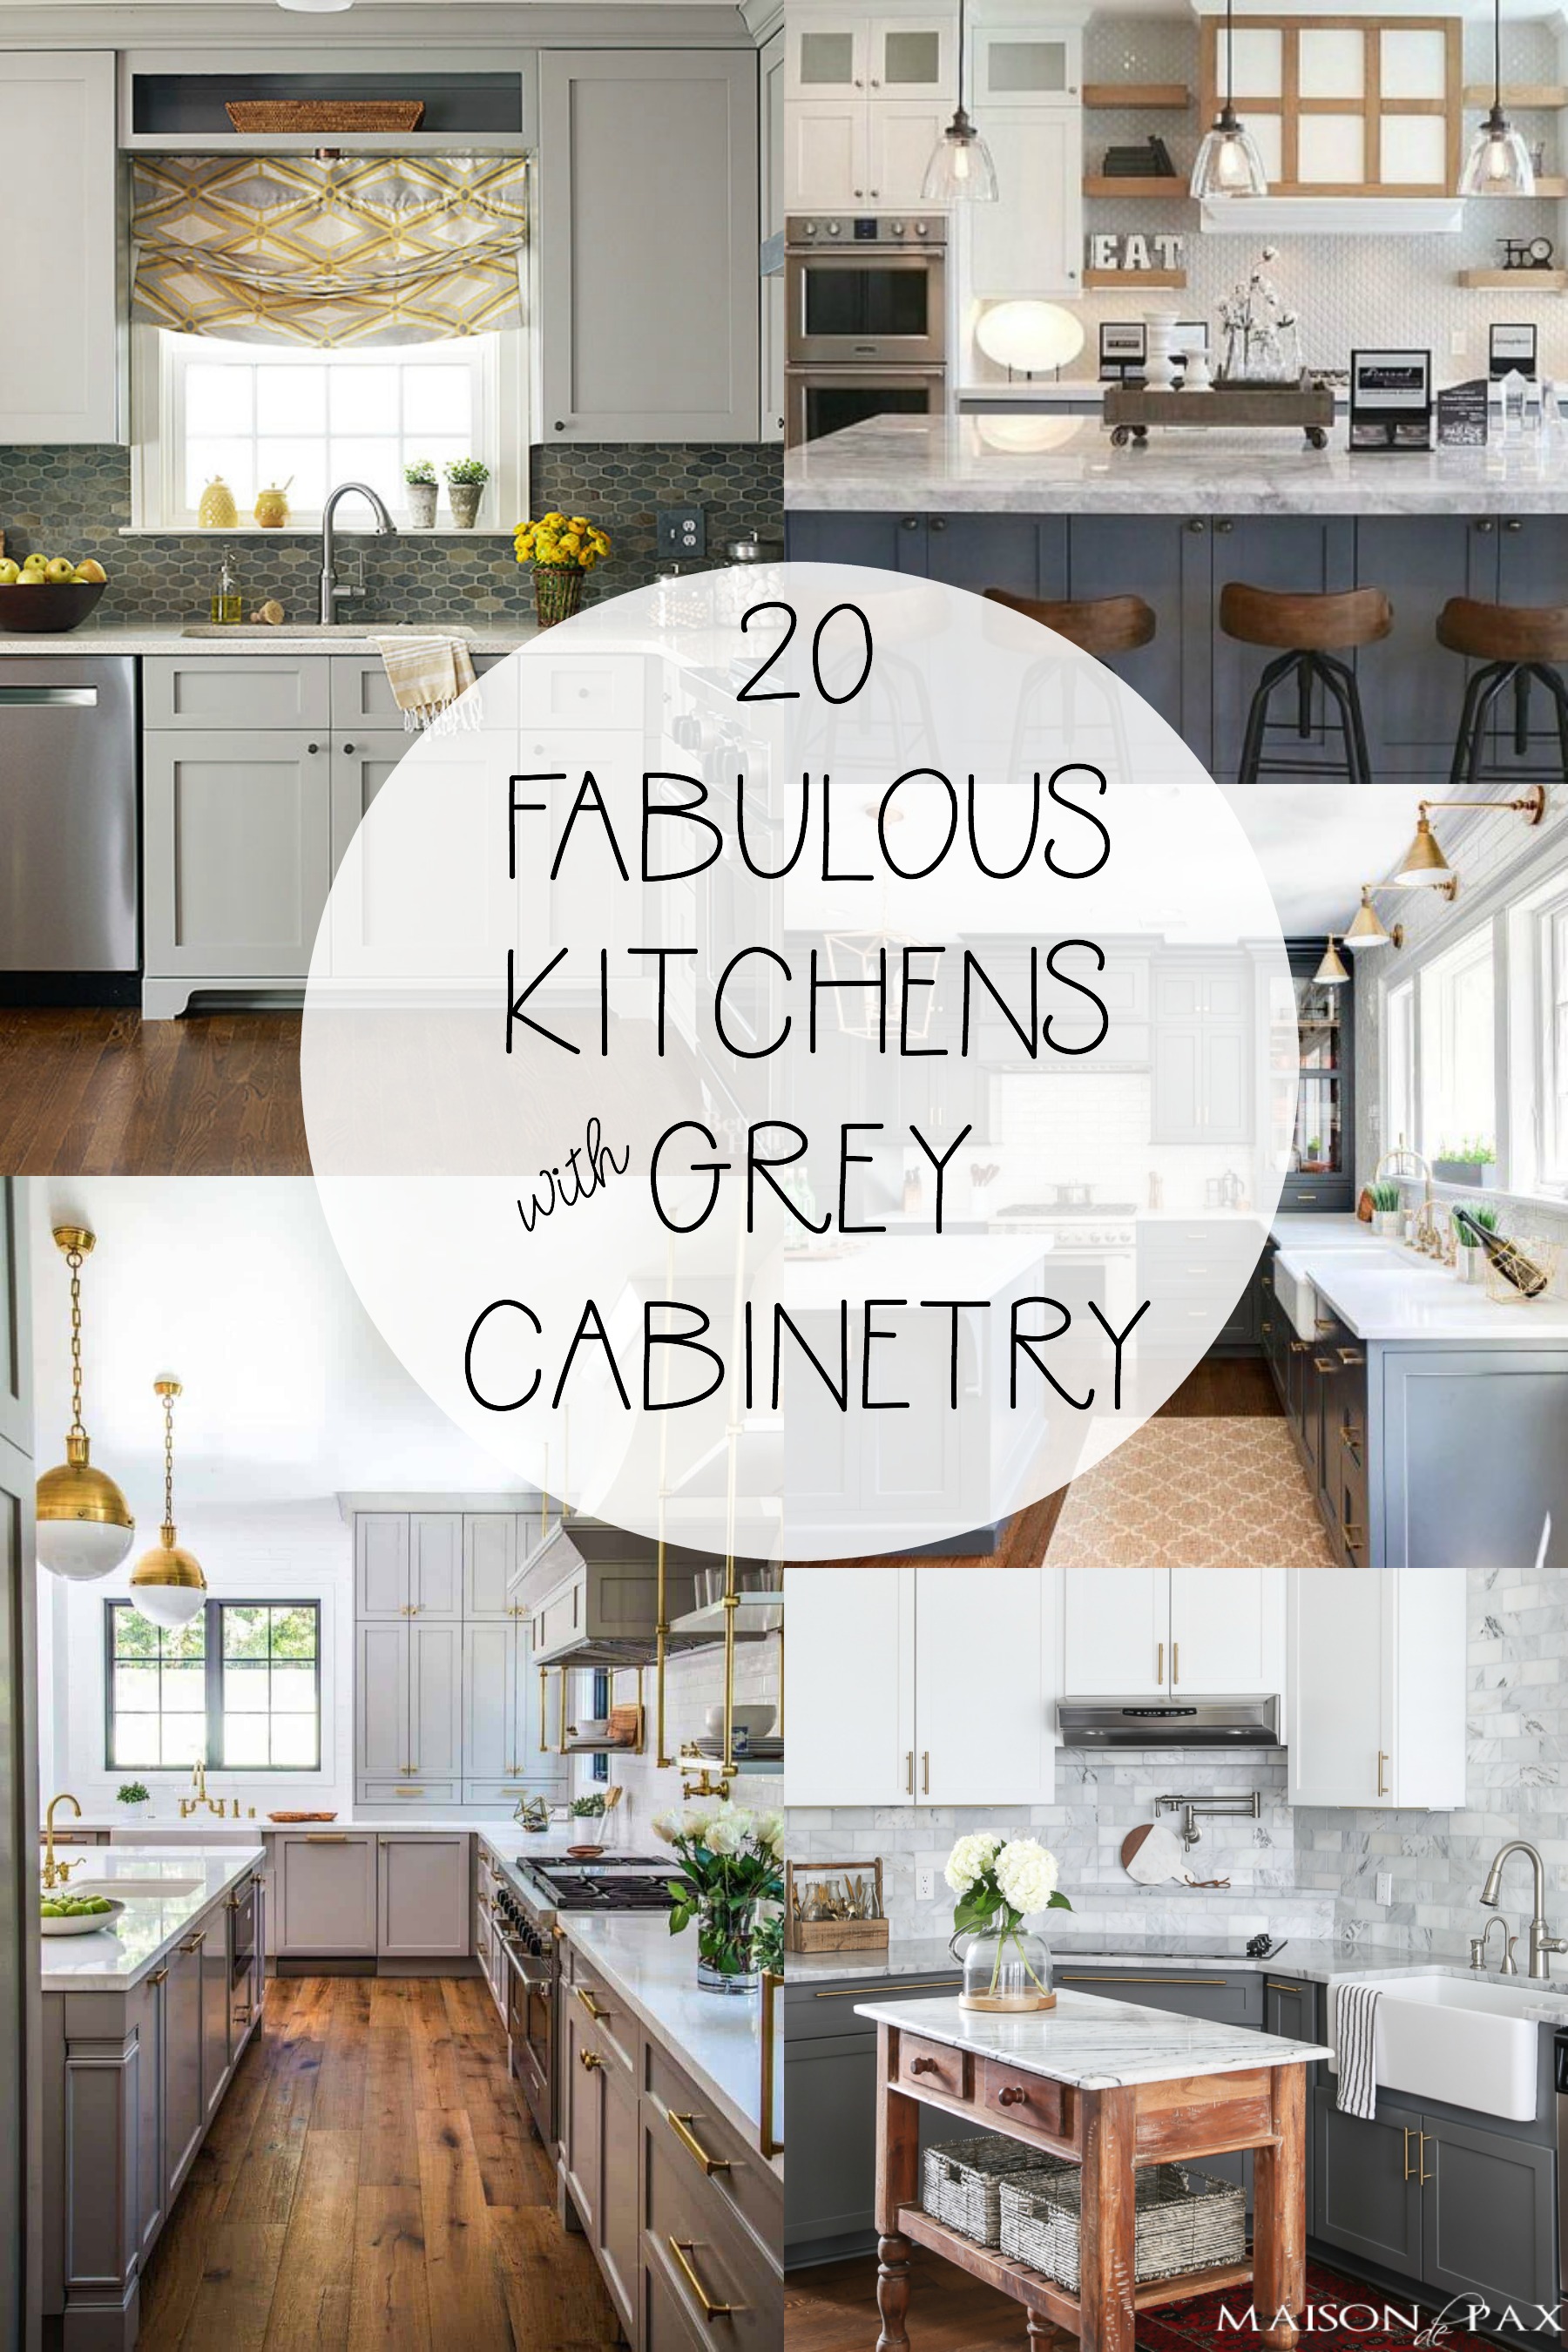 20 Fabulous Kitchens With Grey Cabinetry poster.